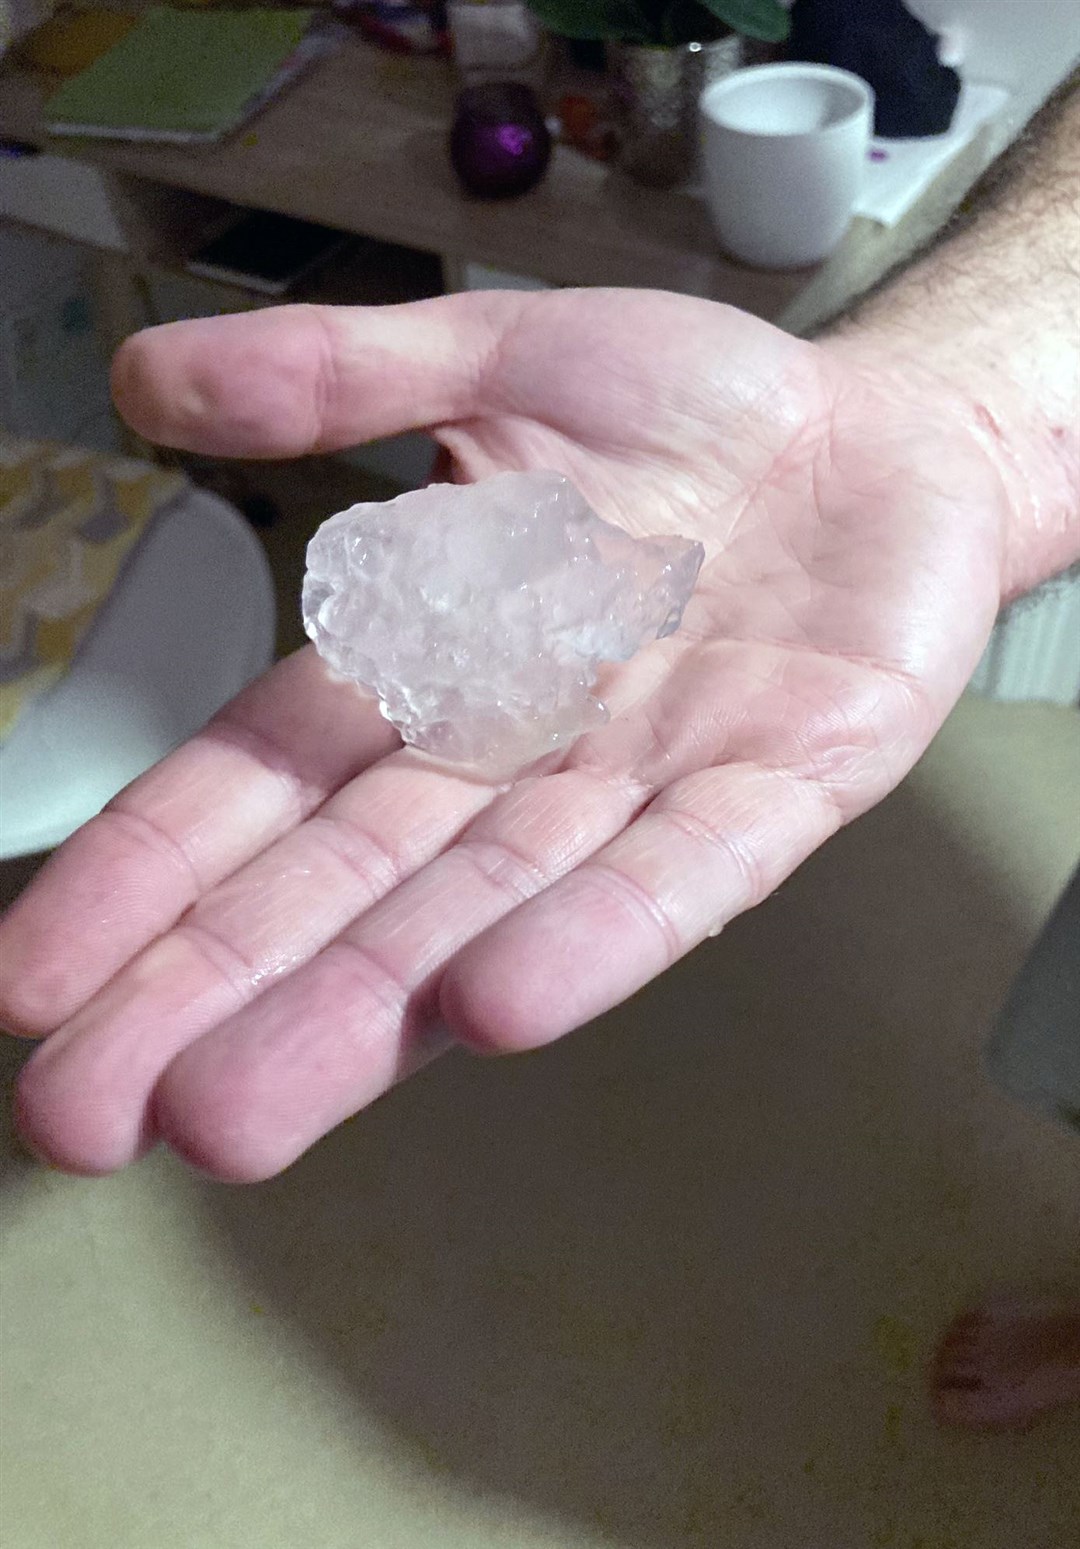 Suzie Phillips from Jersey said she saw hailstones ‘bigger than a golf ball’ overnight (Suzie Phillips/PA)